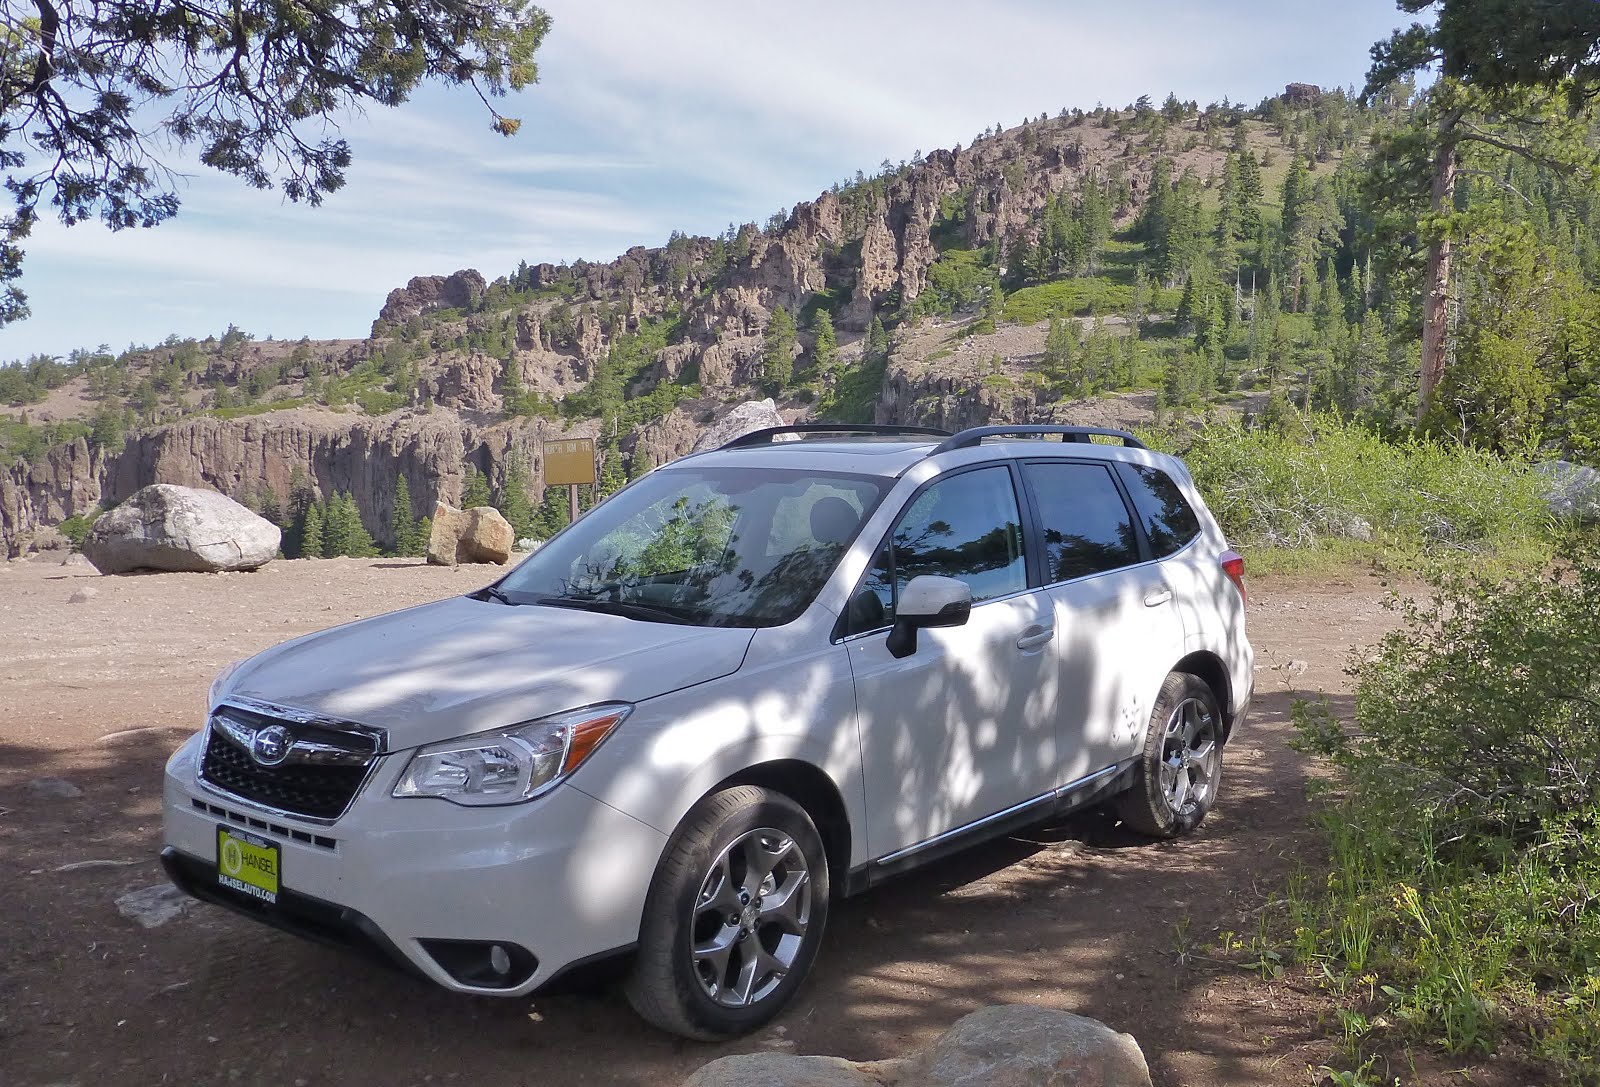 The 2015 Subaru Forester "Touring"